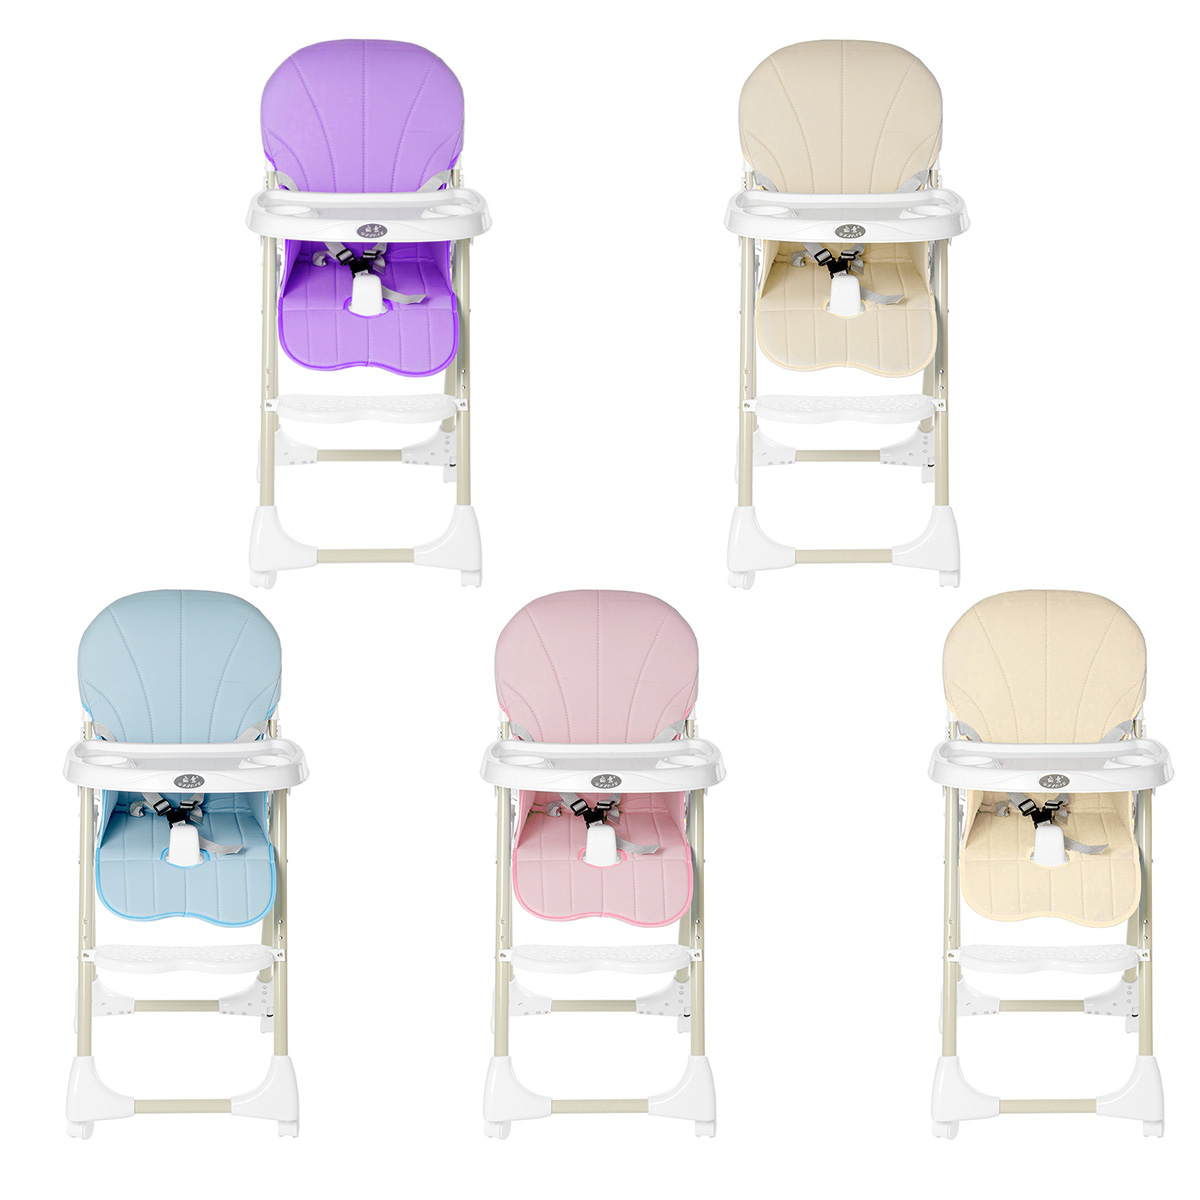 Ditong-Portable-Folding-Baby-High-Chair-Adjustable-Plate-Lockable-Wheels-PU-Seat-with-Environmental--1748389-8